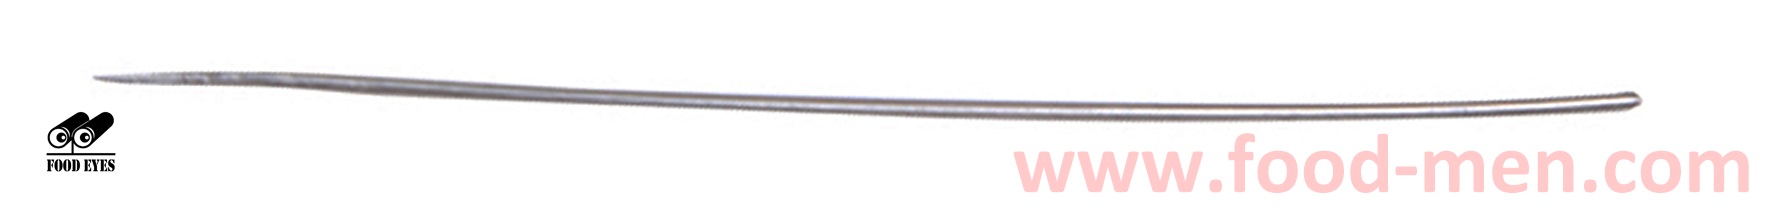 Picture of the metal inoculation needle